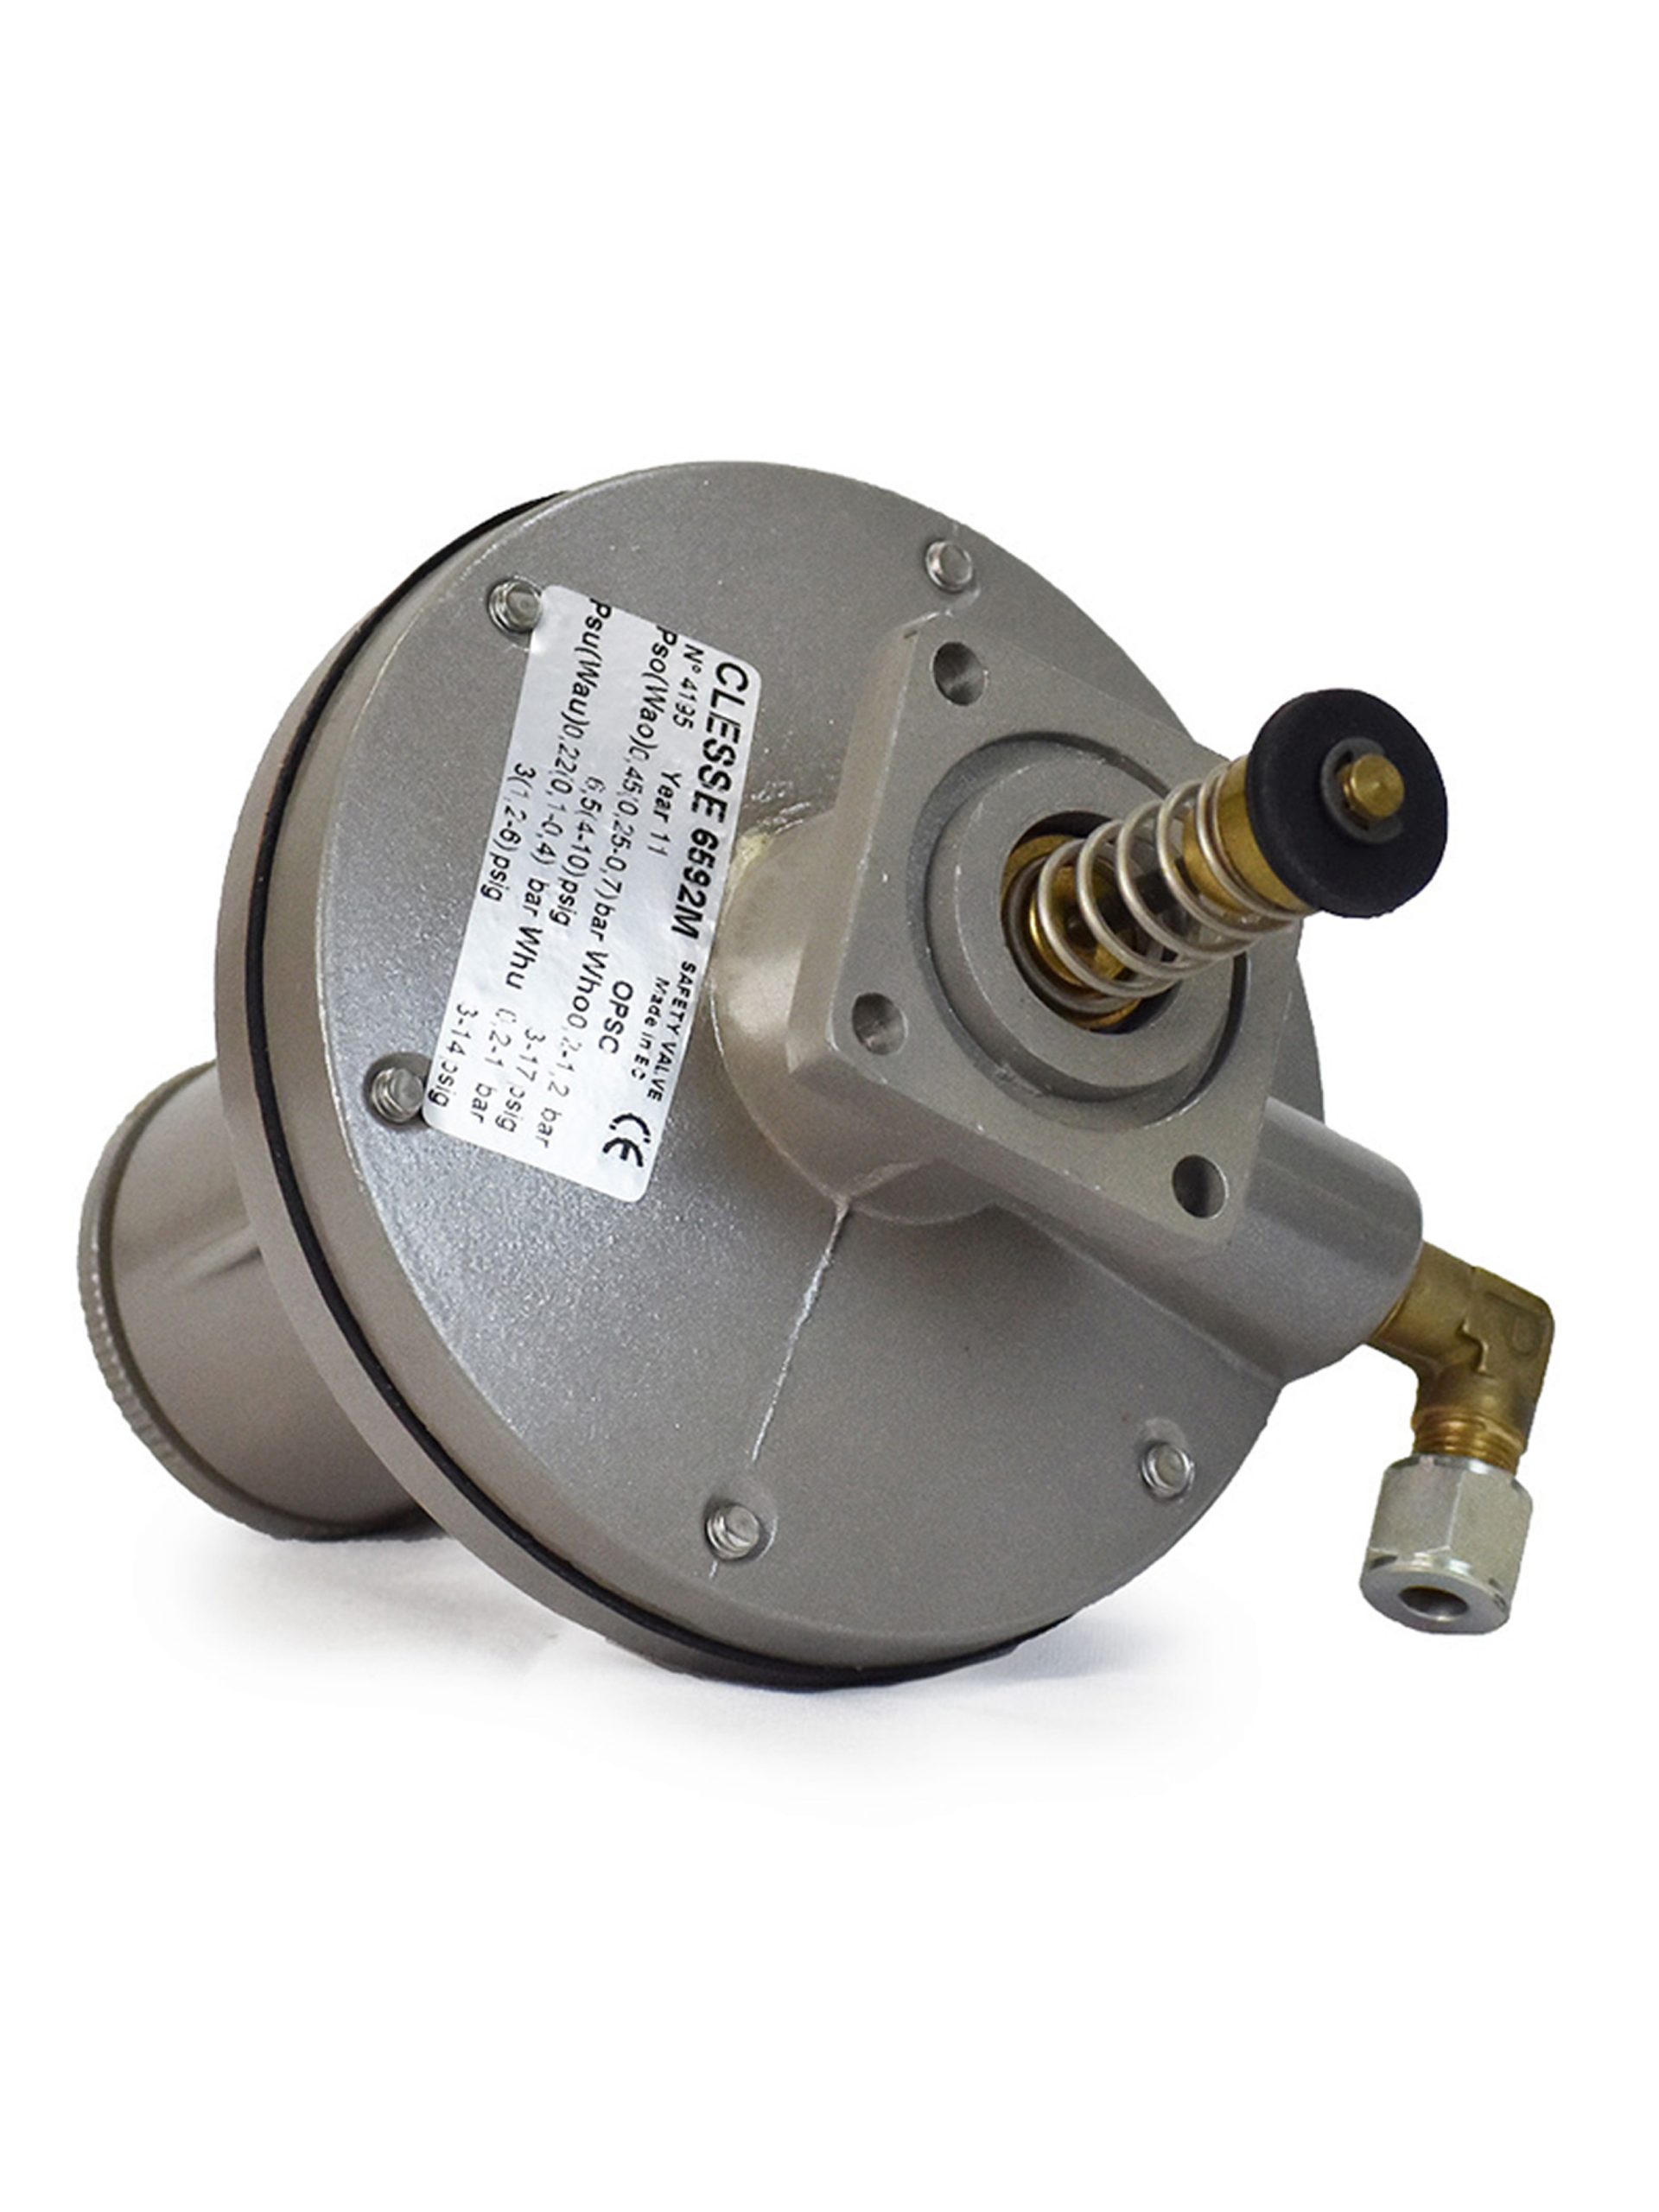 CLESSE UPSO/OPSO PART FOR REGULATOR 1492MF OPSO 450 MBAR UPSO 220 MBAR